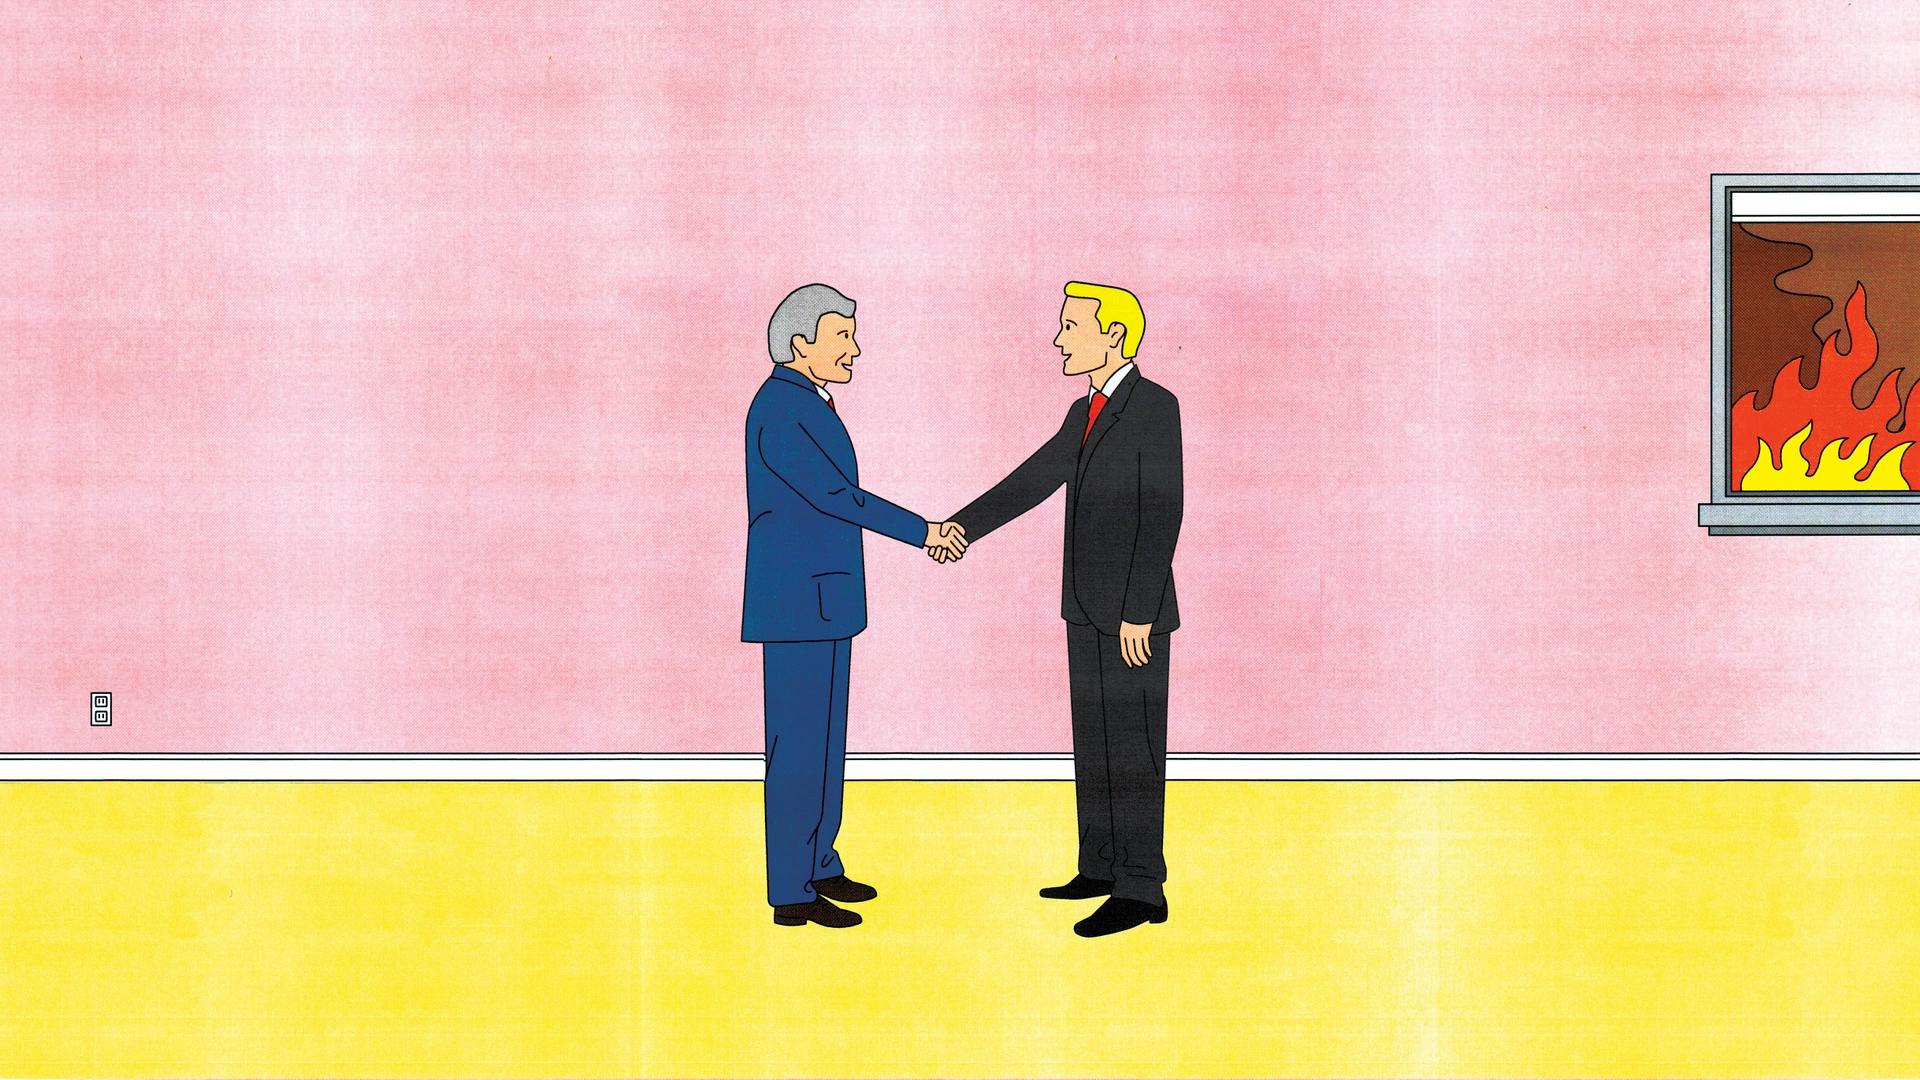 Two men shake hands in front of a pink wall